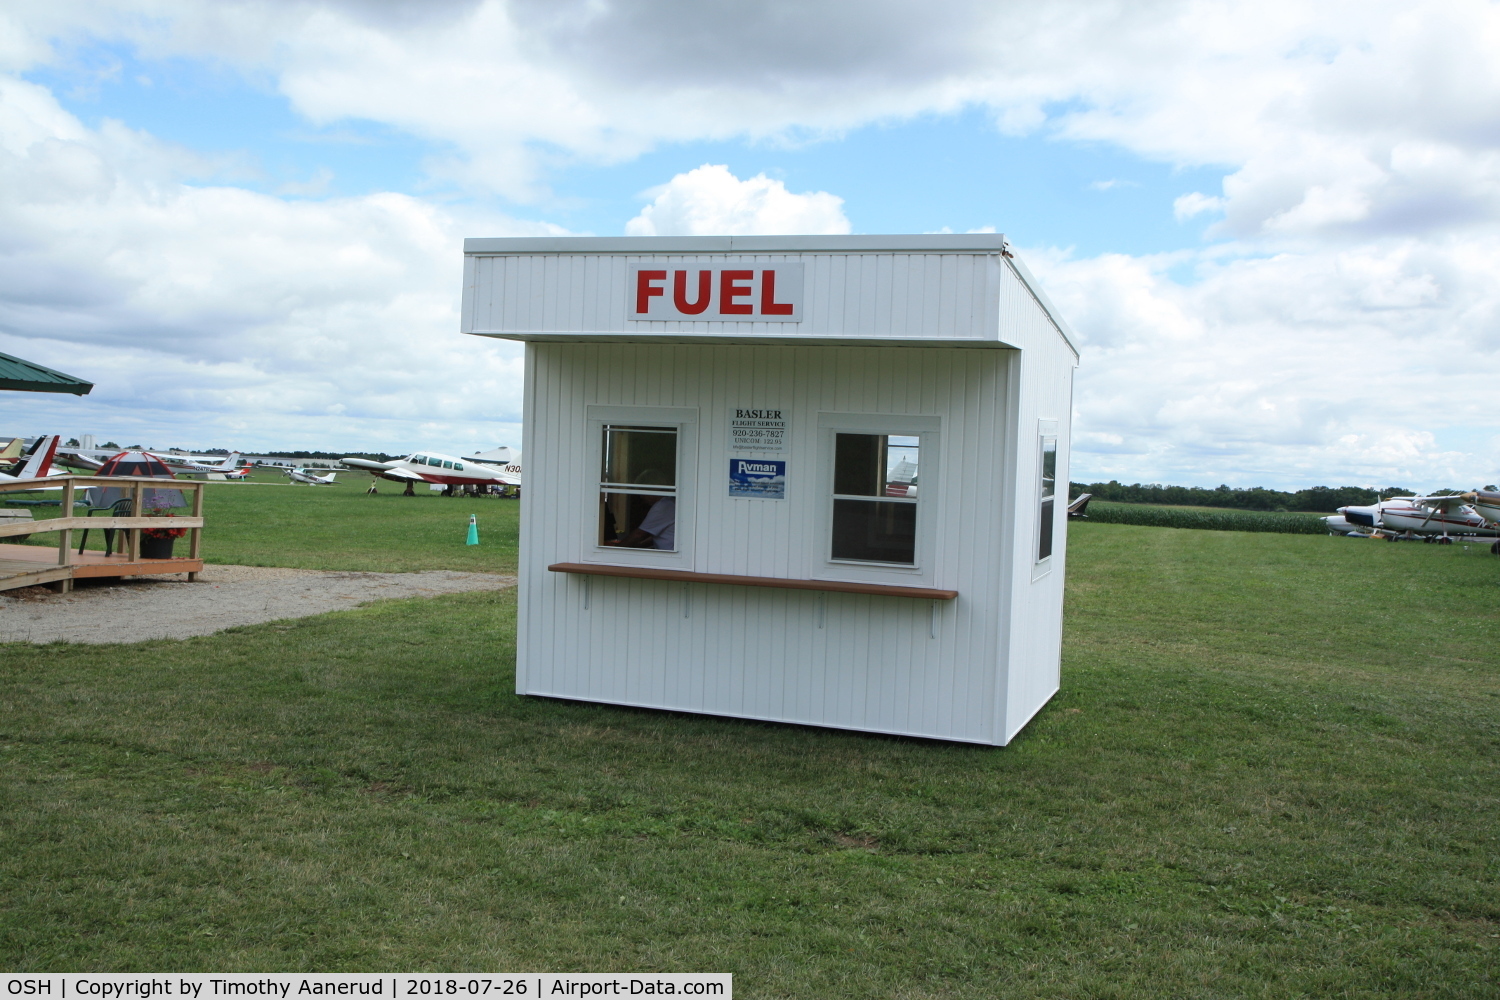 Wittman Regional Airport (OSH) - AirVenture 2018, Basler Fuel Payment Booth, on the South 80 parking area.  $4.89/gallon for 100LL AvGas